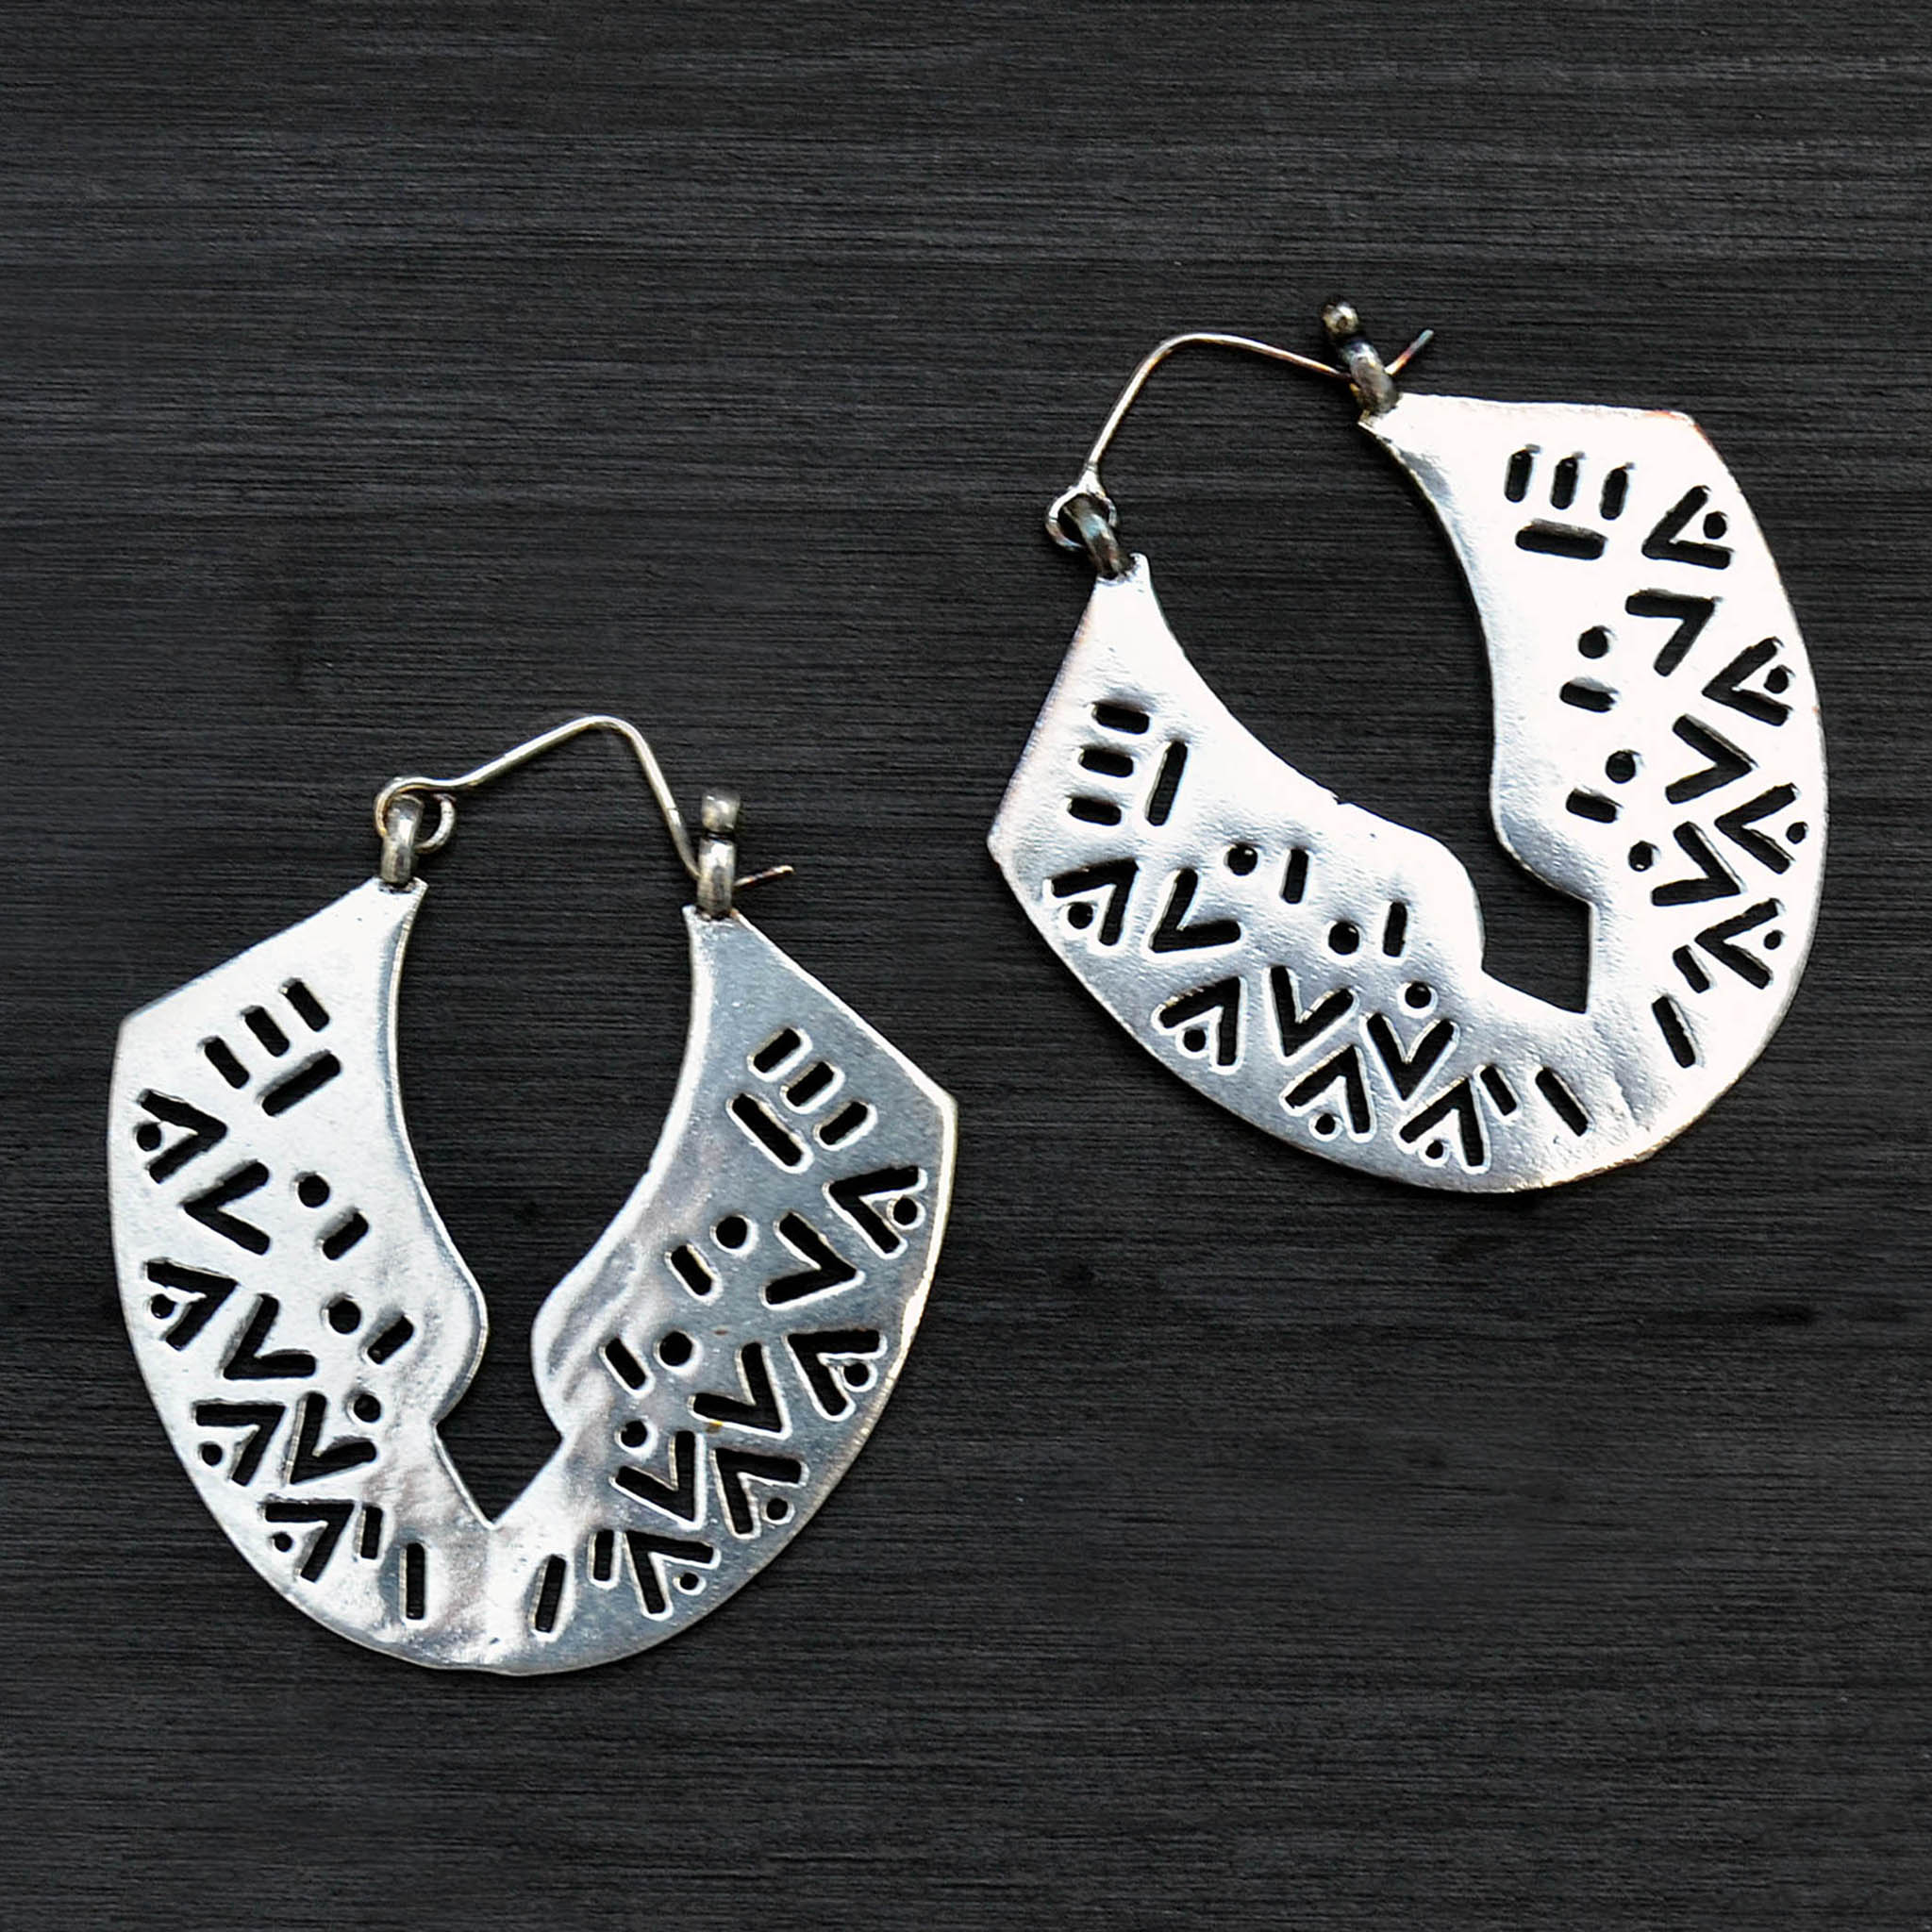 Large ethnic silver carved earrings on black background